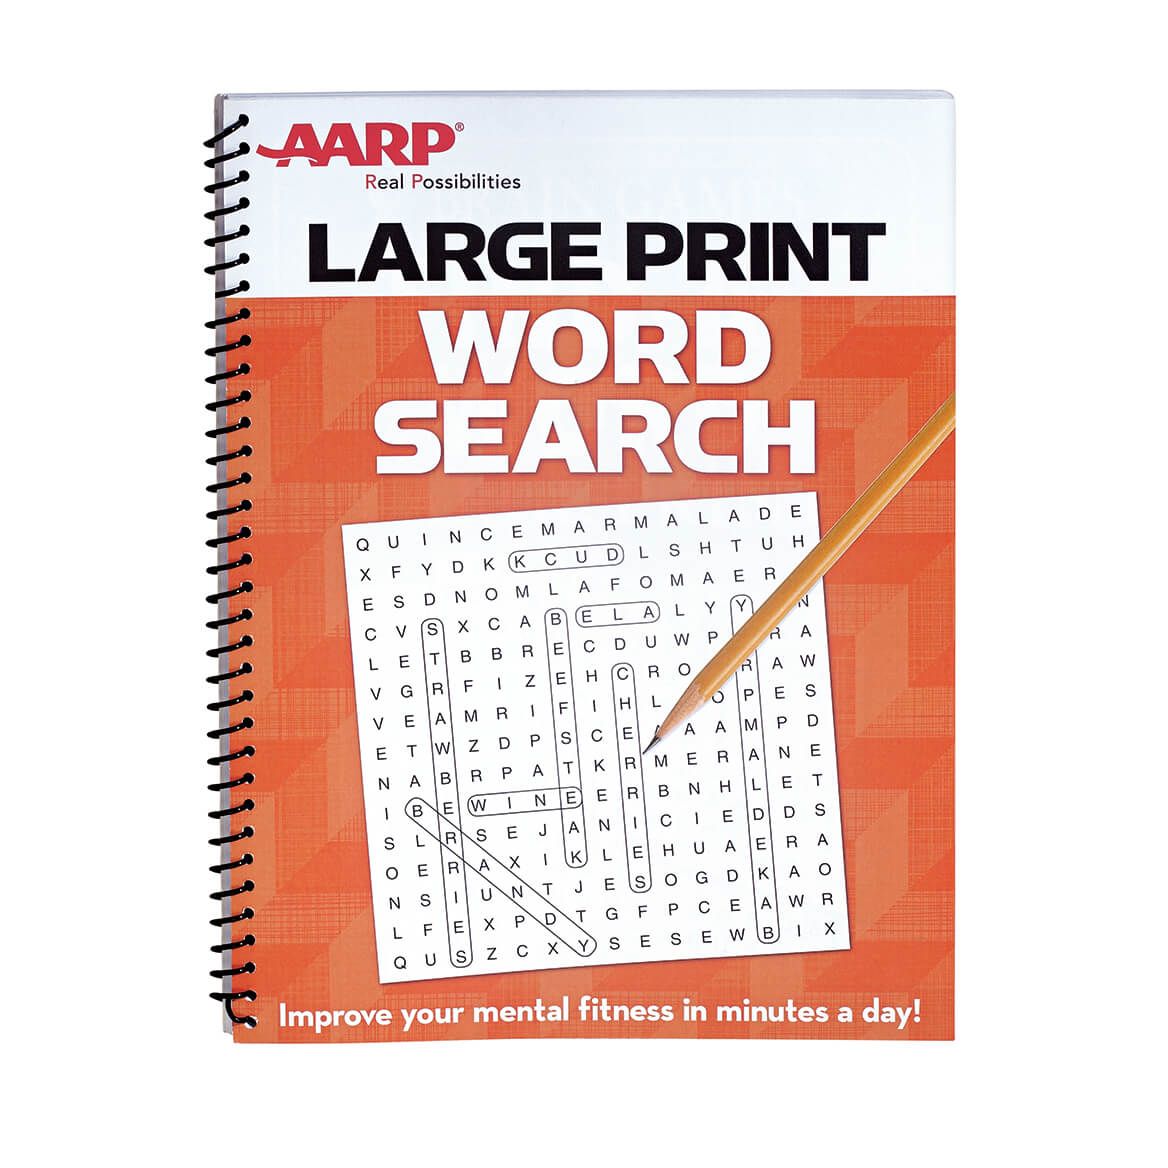 AARP Large Print Word Search + '-' + 351096